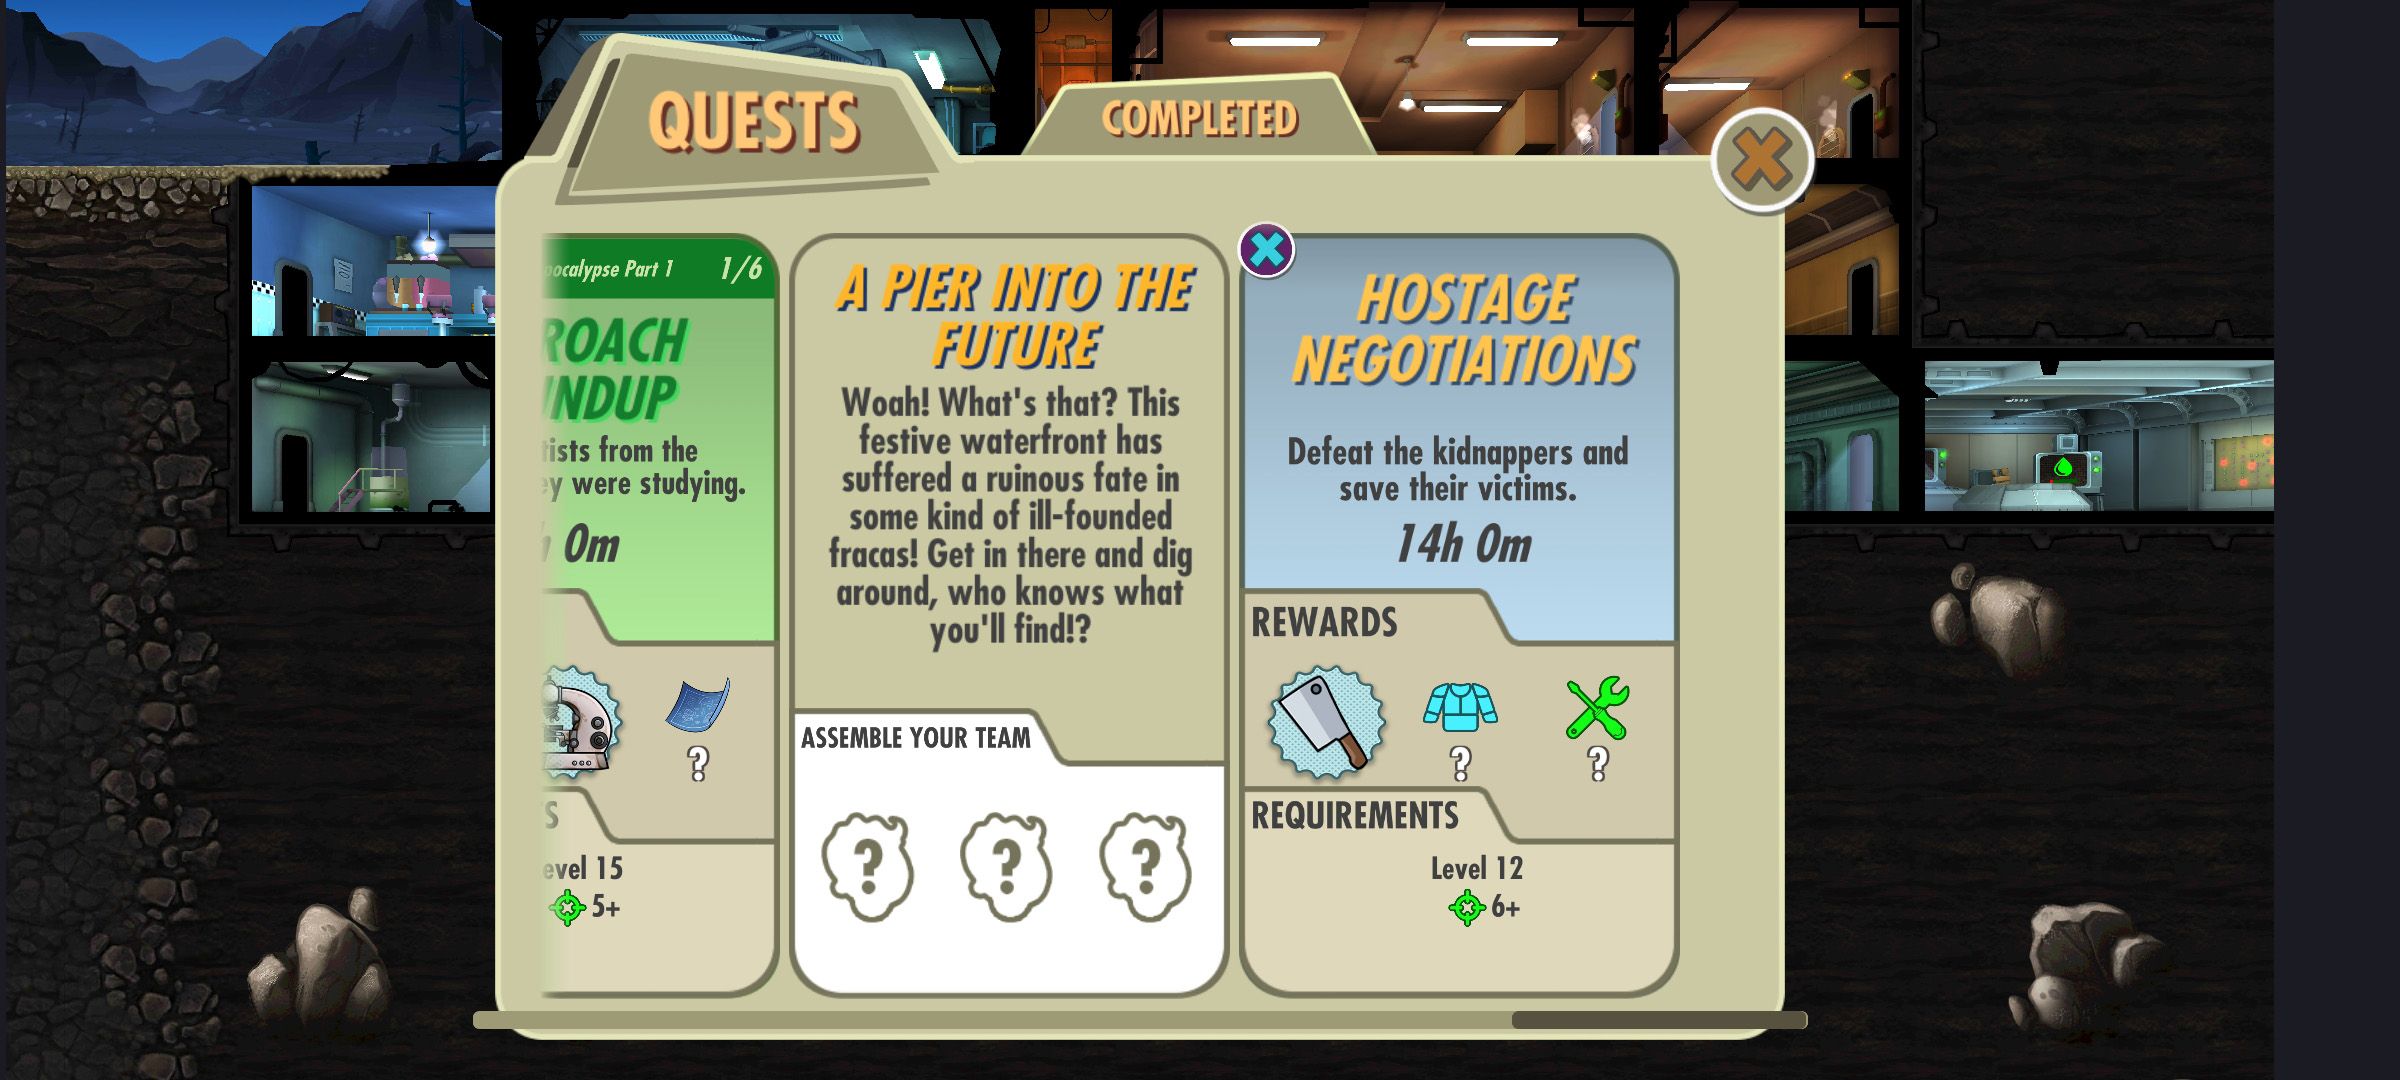 Fallout Shelter Lucy quest details